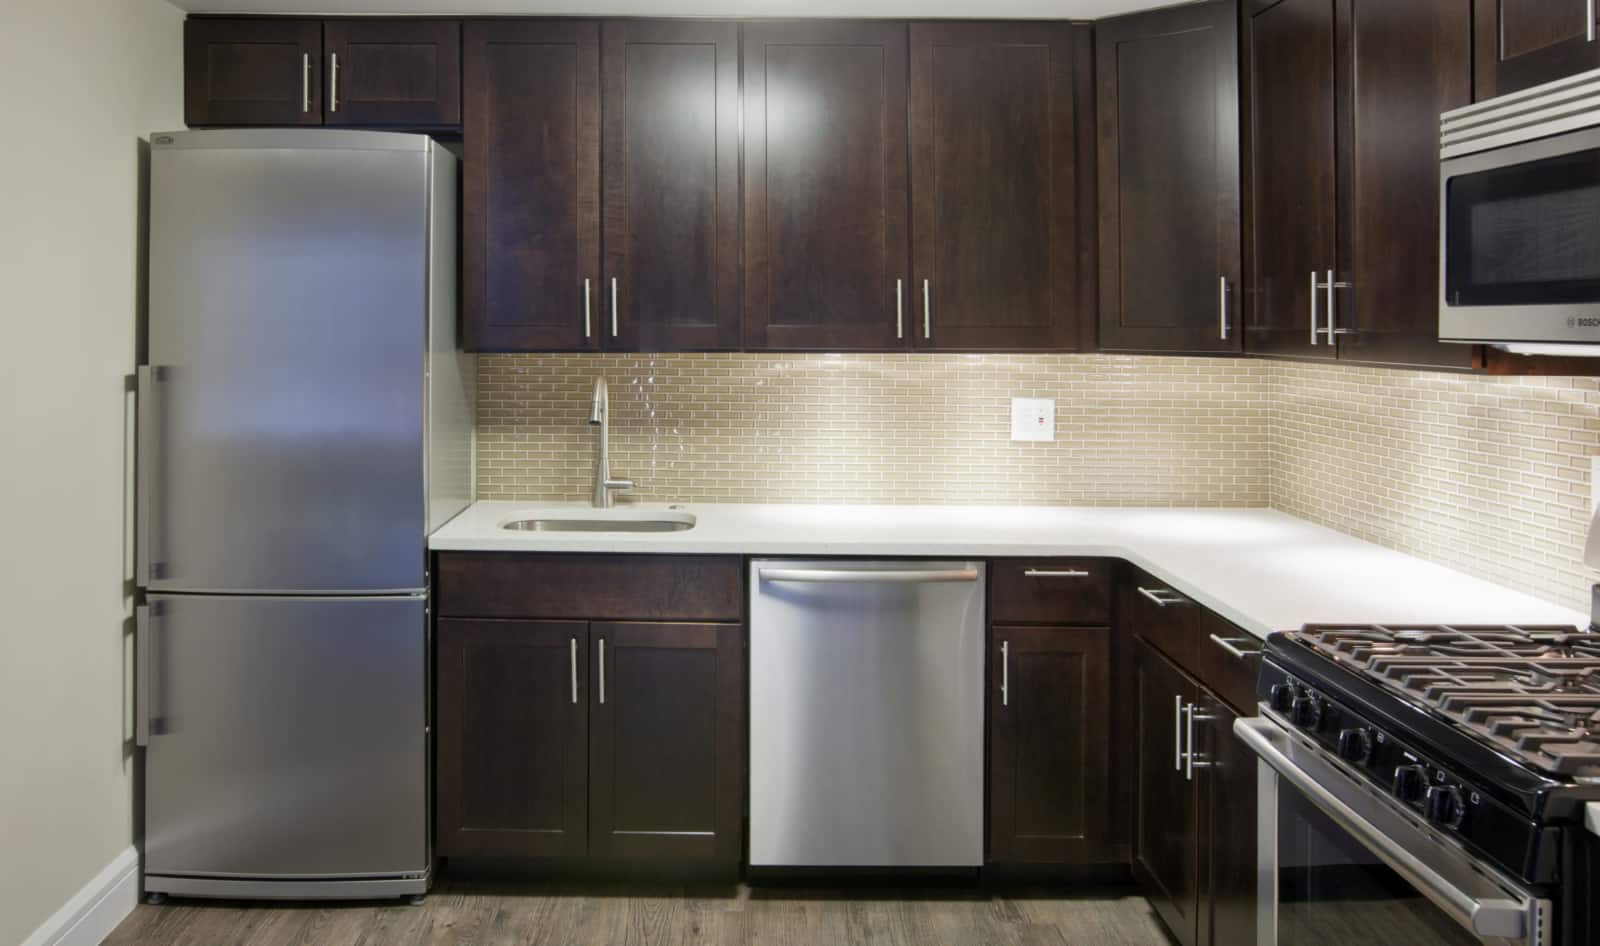 Interior of apartment kitchen with stainless steel appliances, white countertops and dark cabinets.